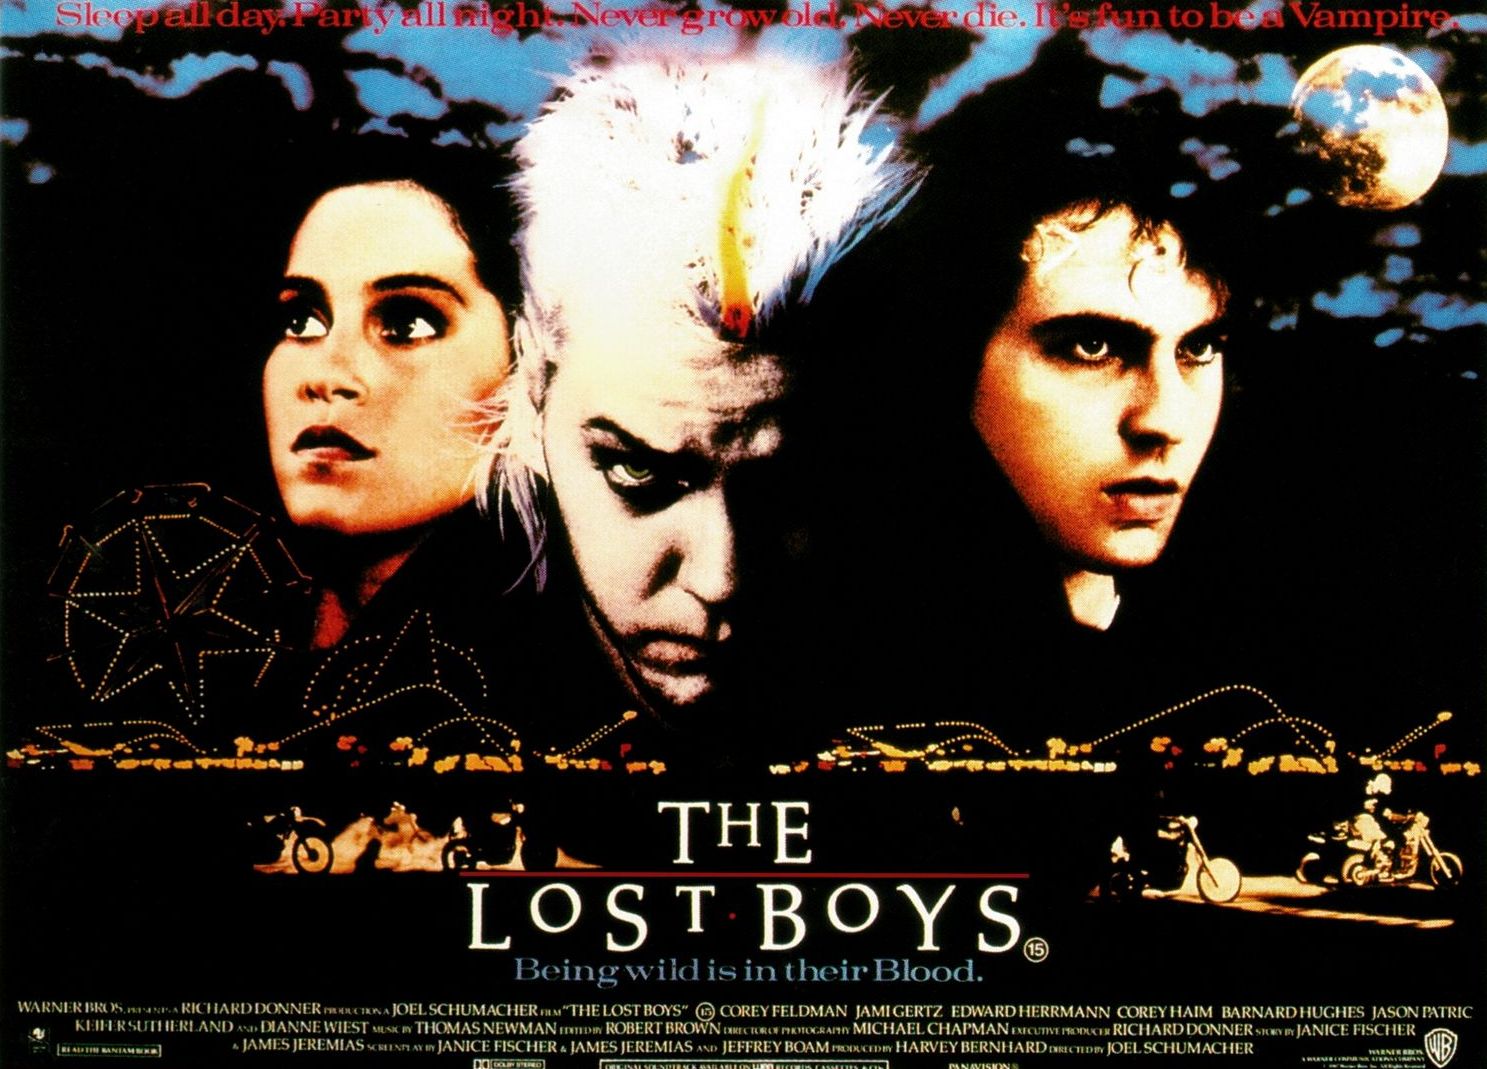 The Lost Boys poster